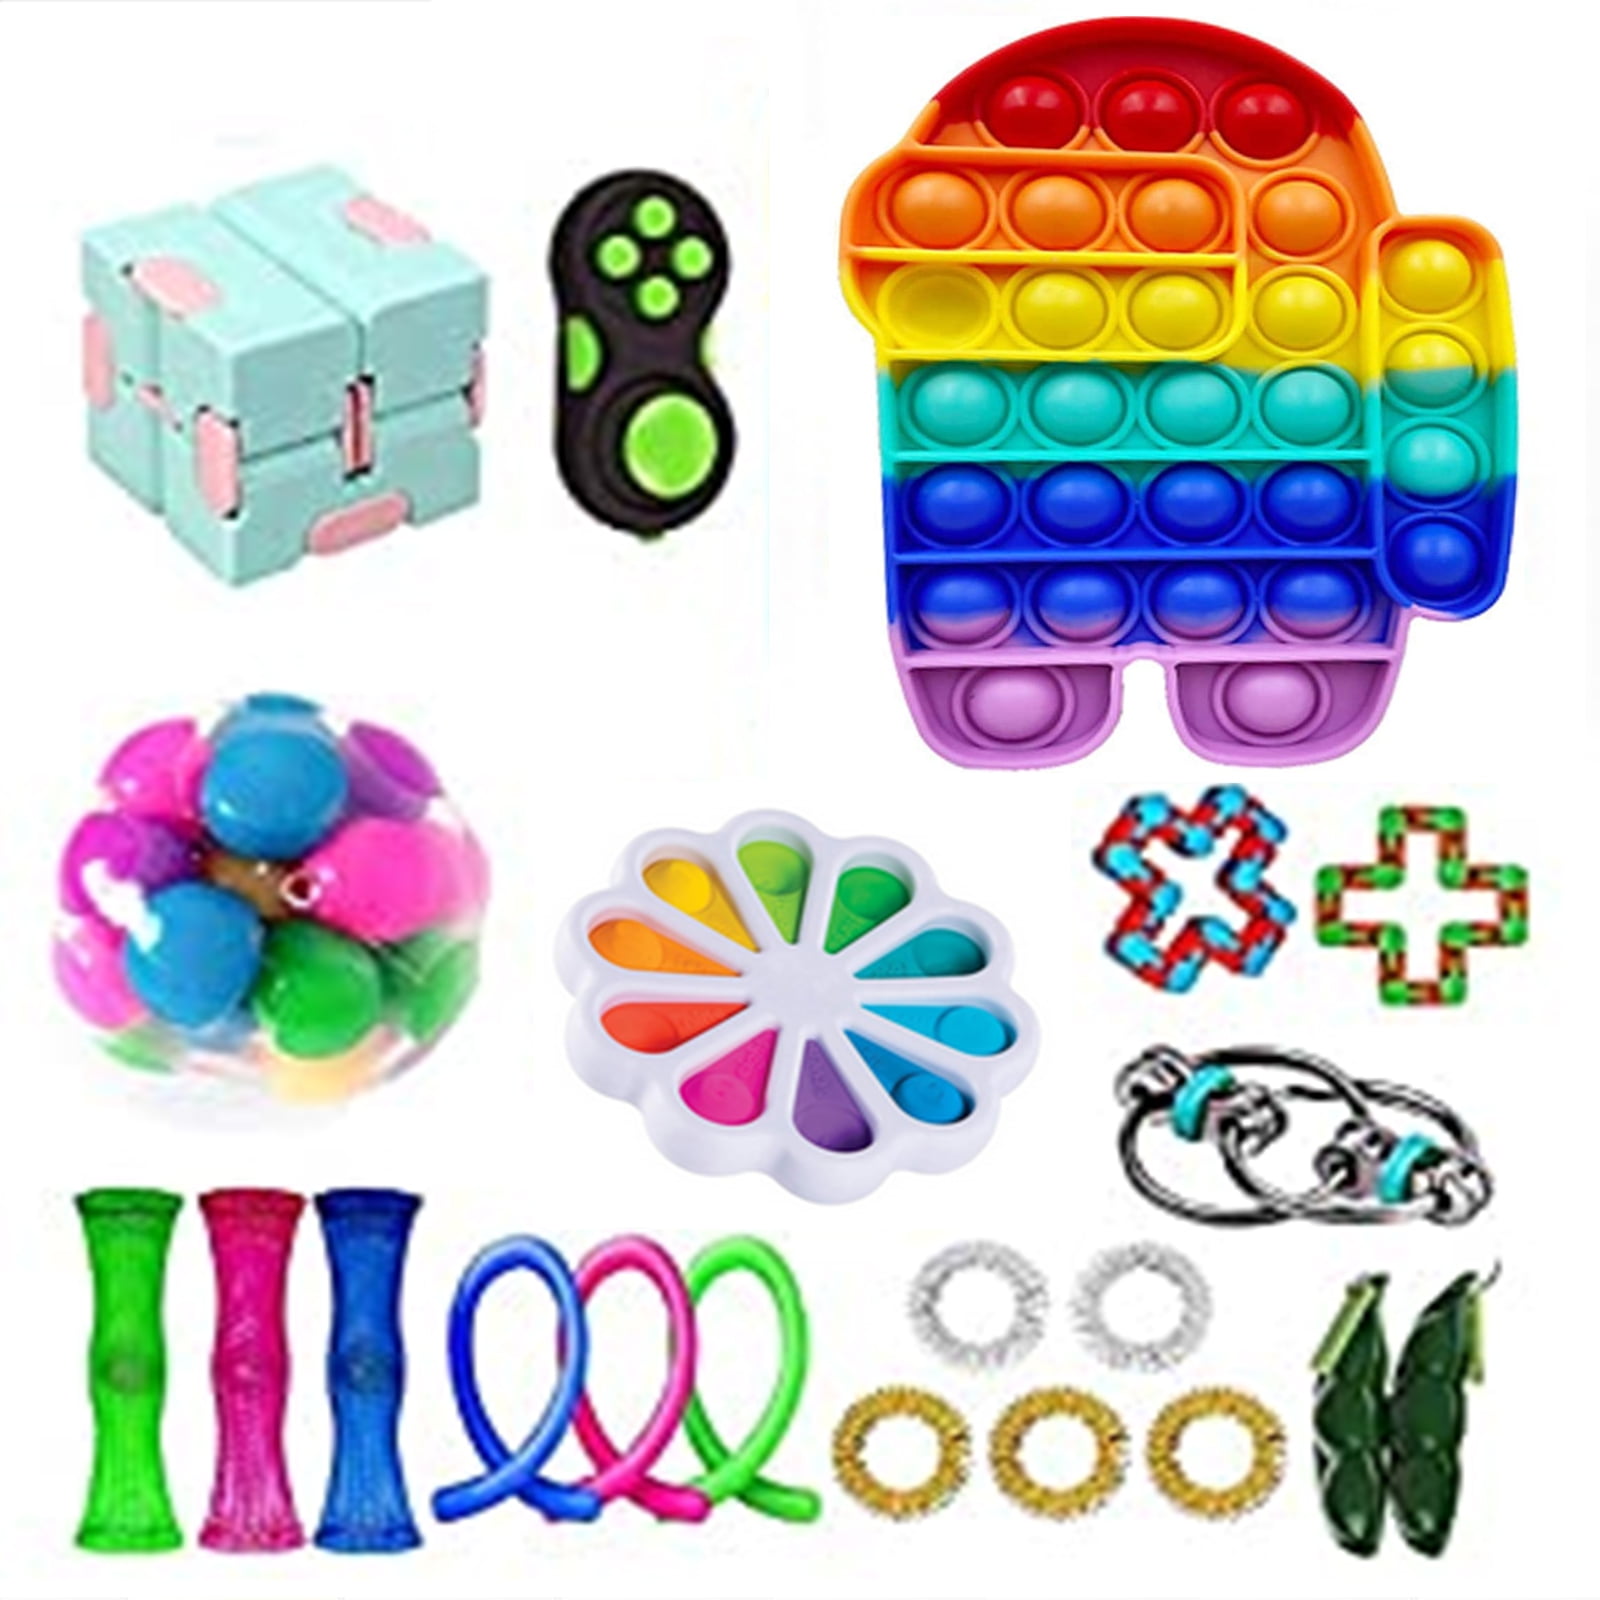 Details about   17PCS Sensory Toy Fidget Toys Sets Anxiety Autism ADHD Stress Relief Adults Kids 